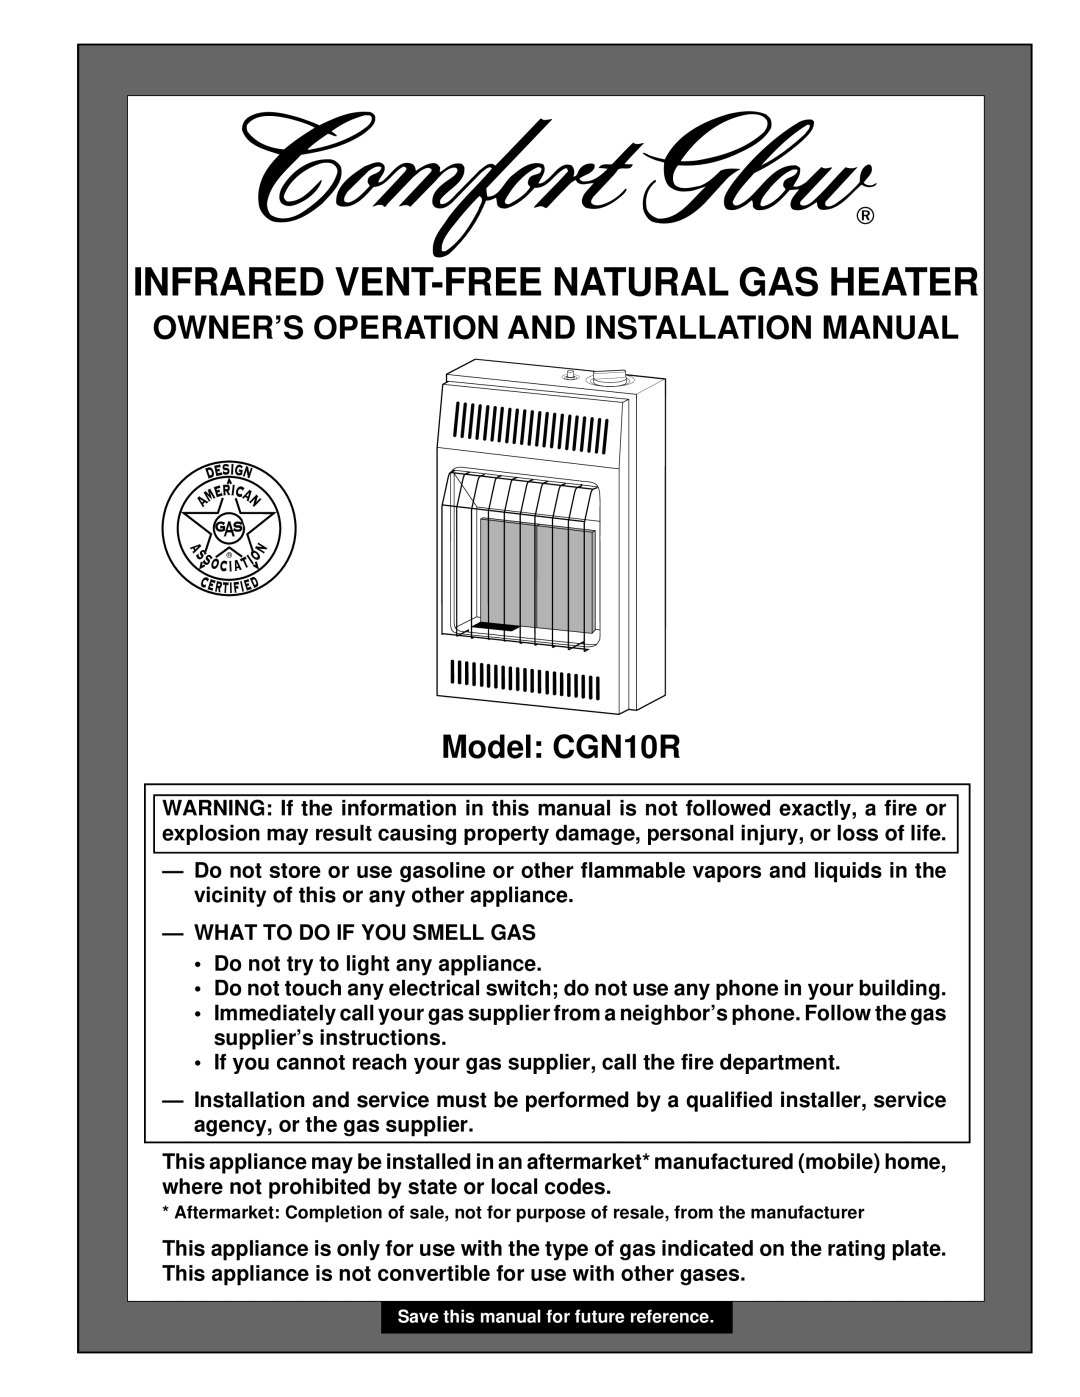 Desa installation manual Owner’S Operation And Installation Manual, Model: CGN10R, Infrared Vent-Freenatural Gas Heater 